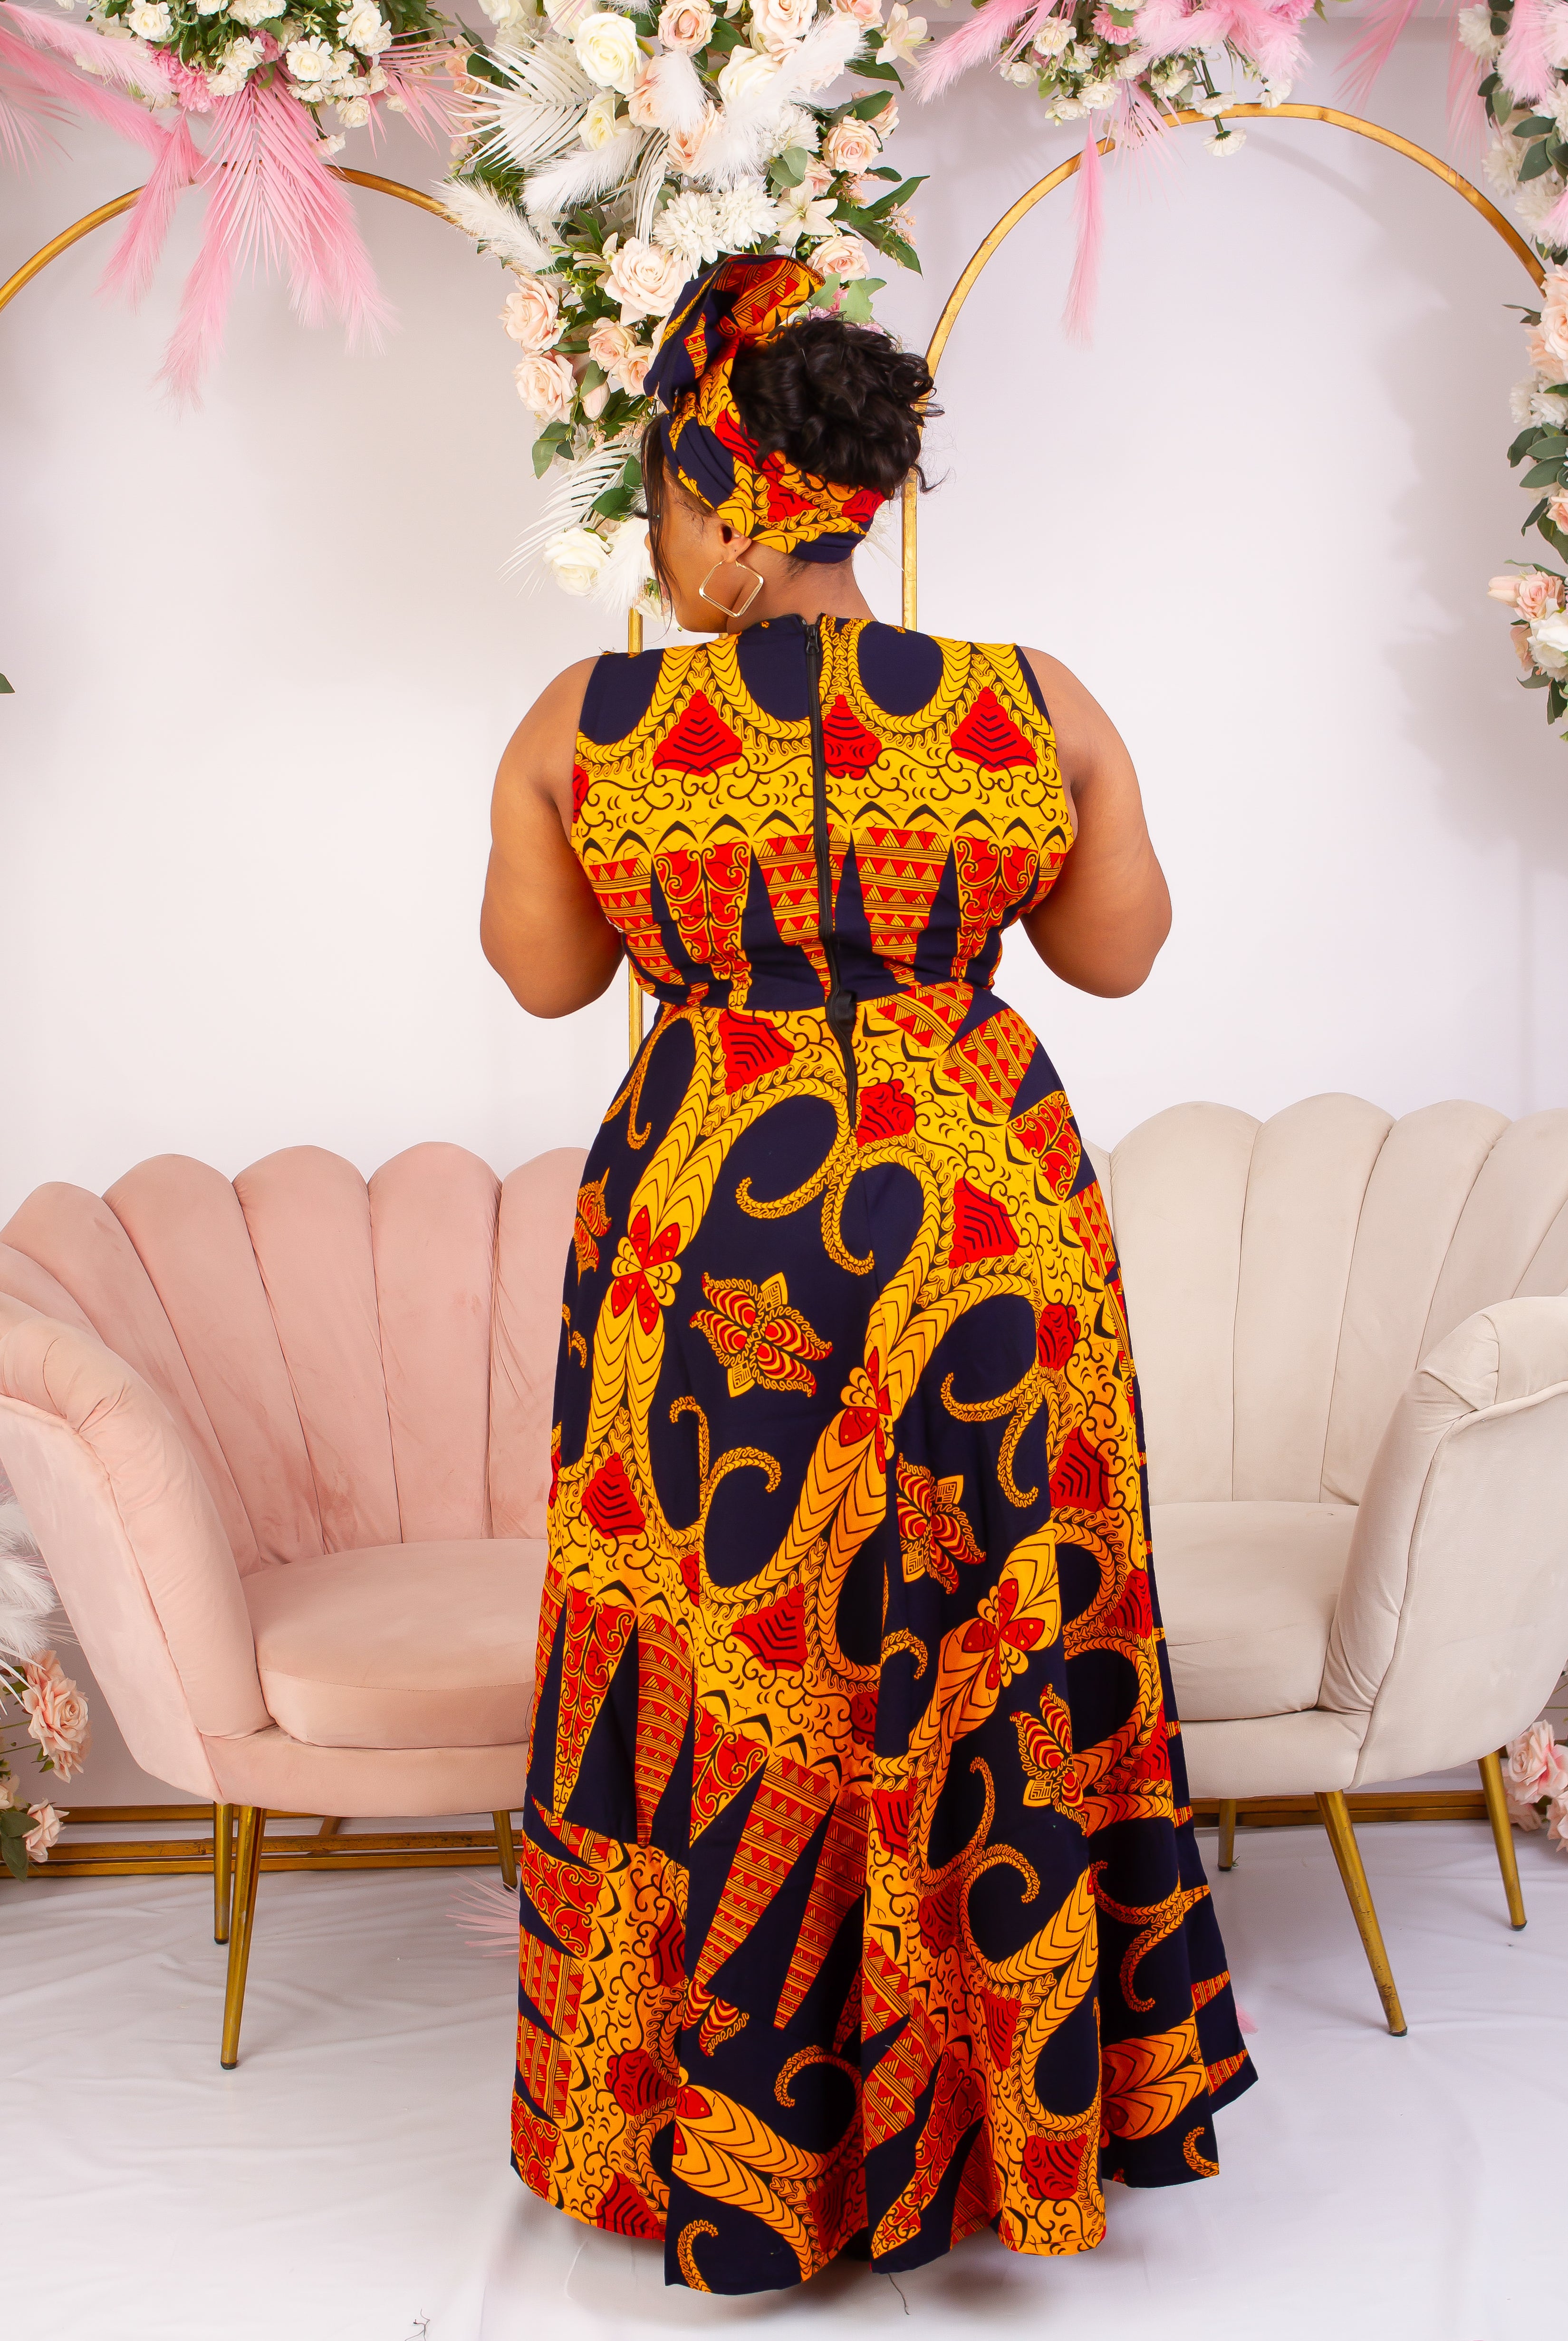 Vibrant Yellow and Navy Blue African Print flare maxi dress perfect for a special occasion. Sleeveless with bust cut out for an edgy and chic look. Shop Ghana African print dress | African maxi dresses | African print gown | African Clothing Online  Shop | Maxi African dress |  African women's clothing  | kitenge dresses | Africa Dresses for Women | African dresses for wedding | Danshiki Dress | Trendy African Dress | African clothing UK